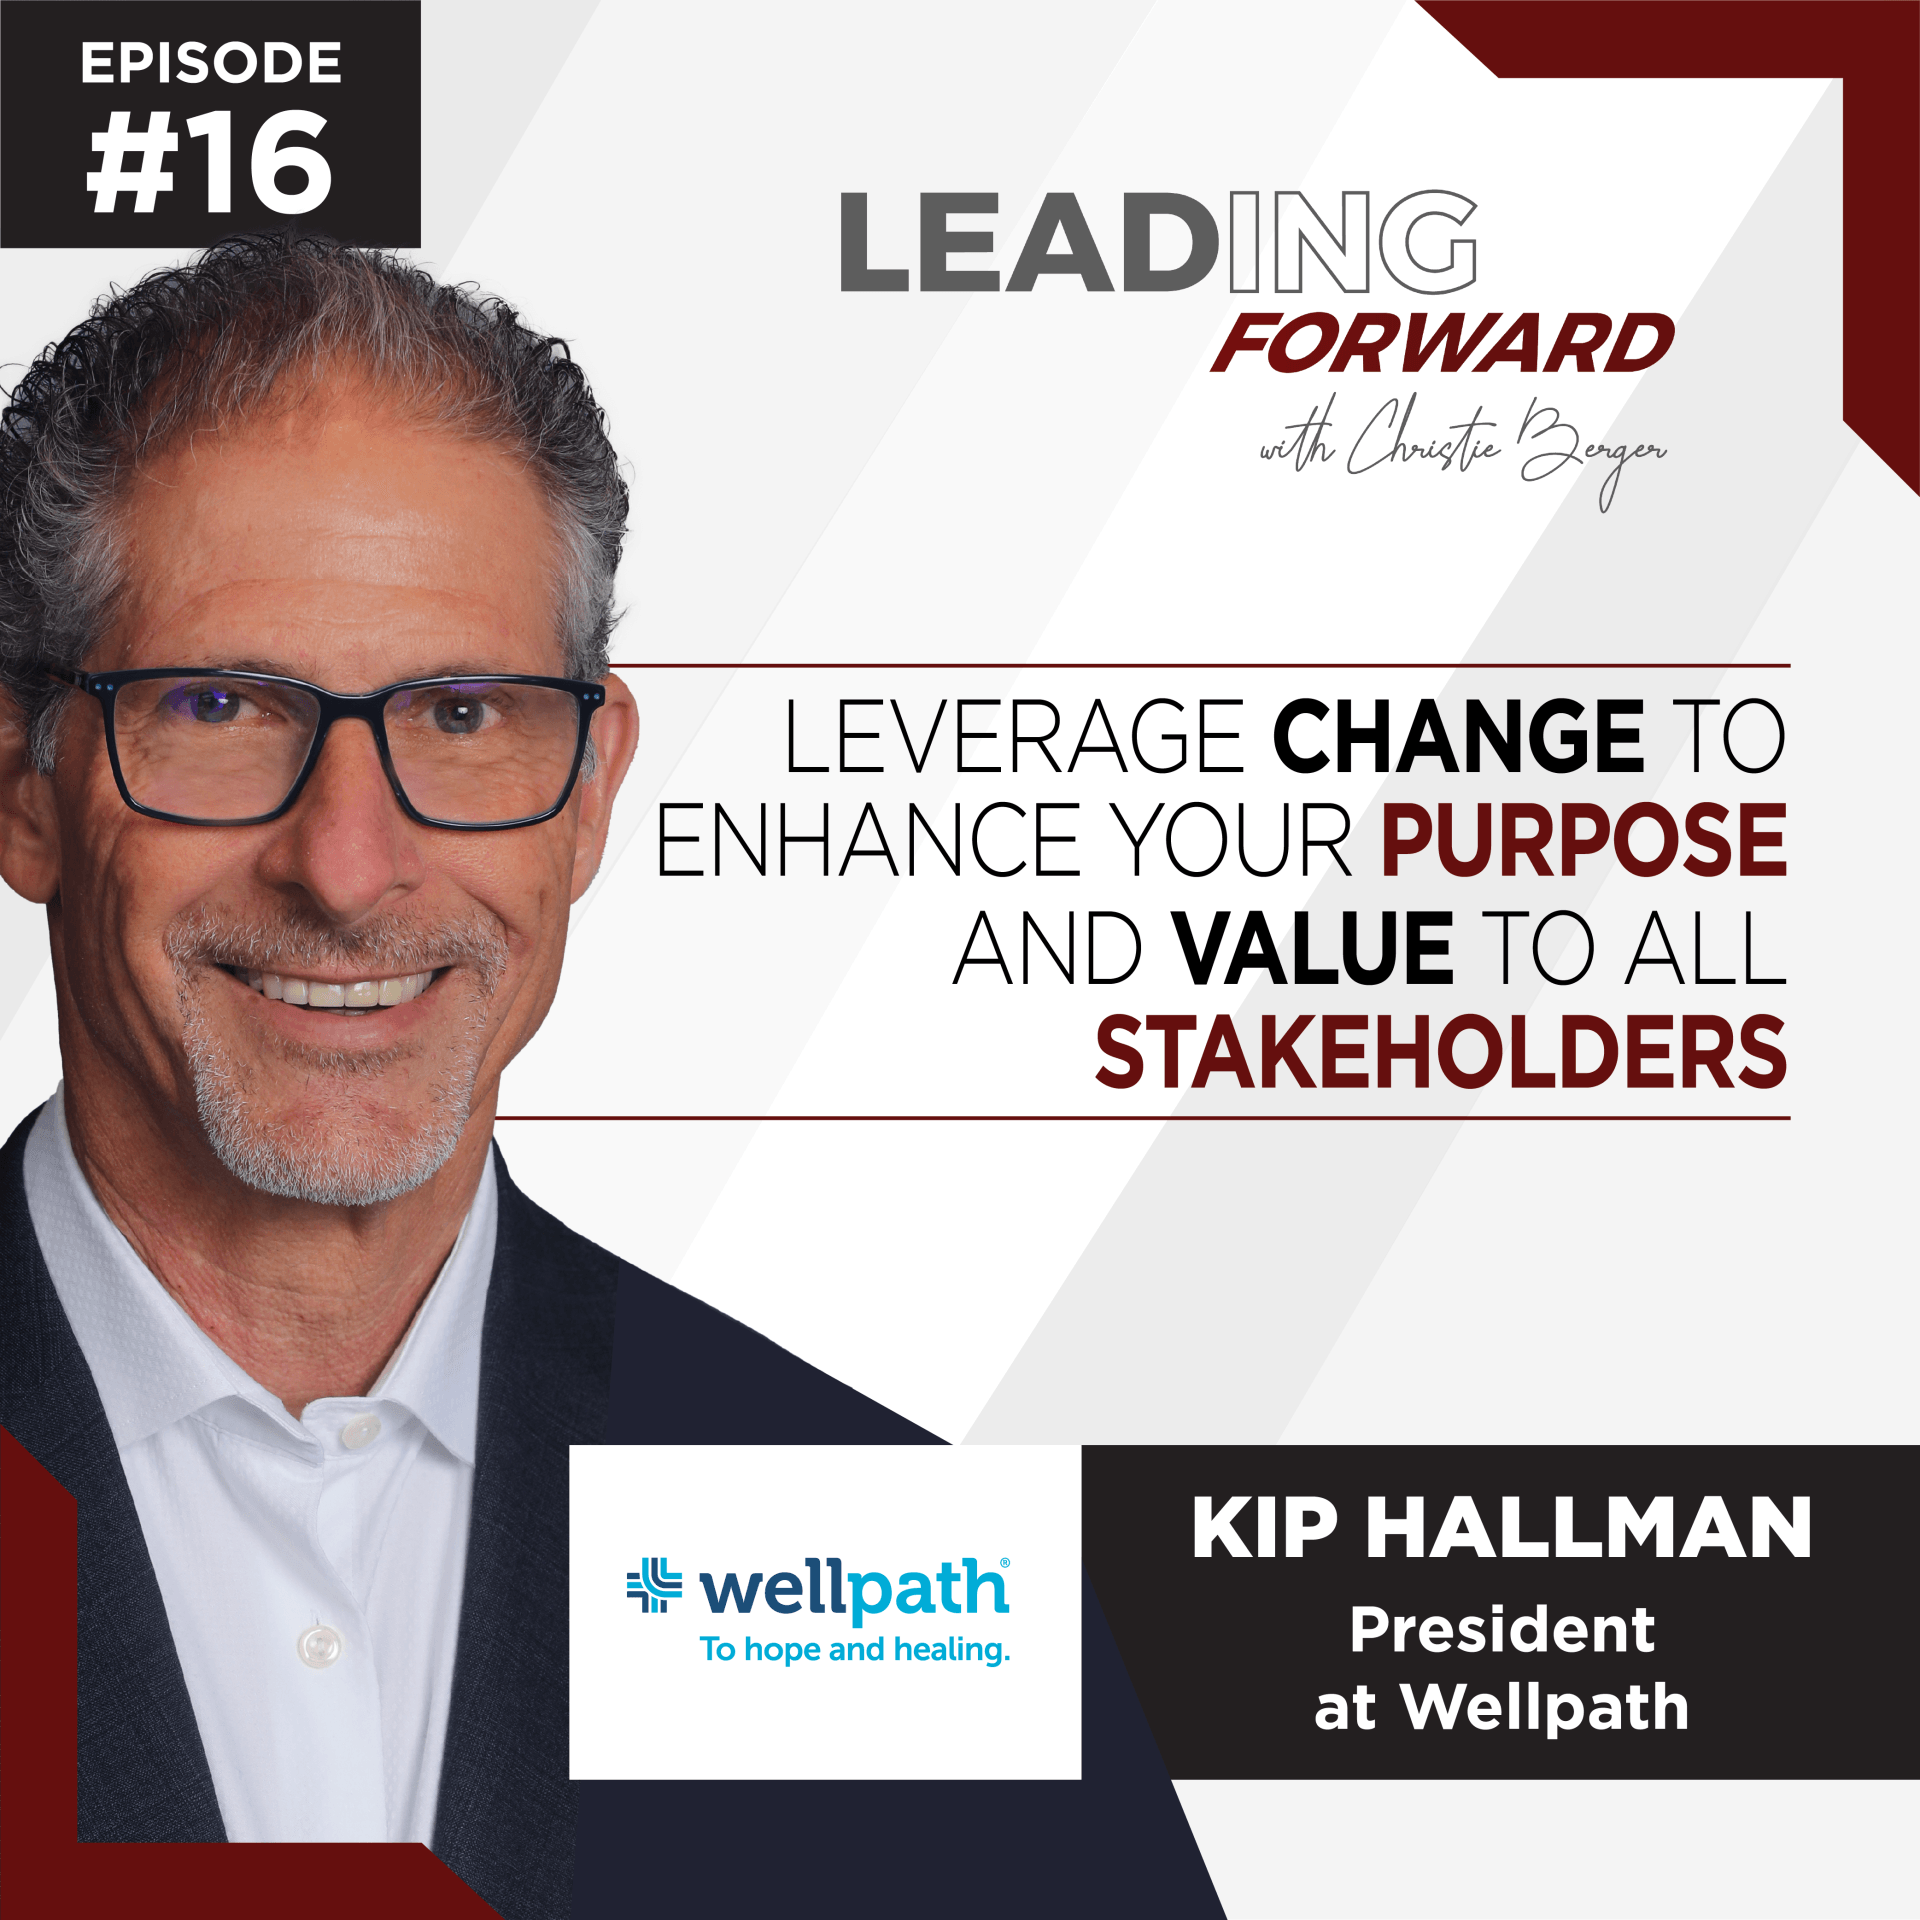 Kip Hallman is the President at Wellpath and was interviewed on Leading Forward